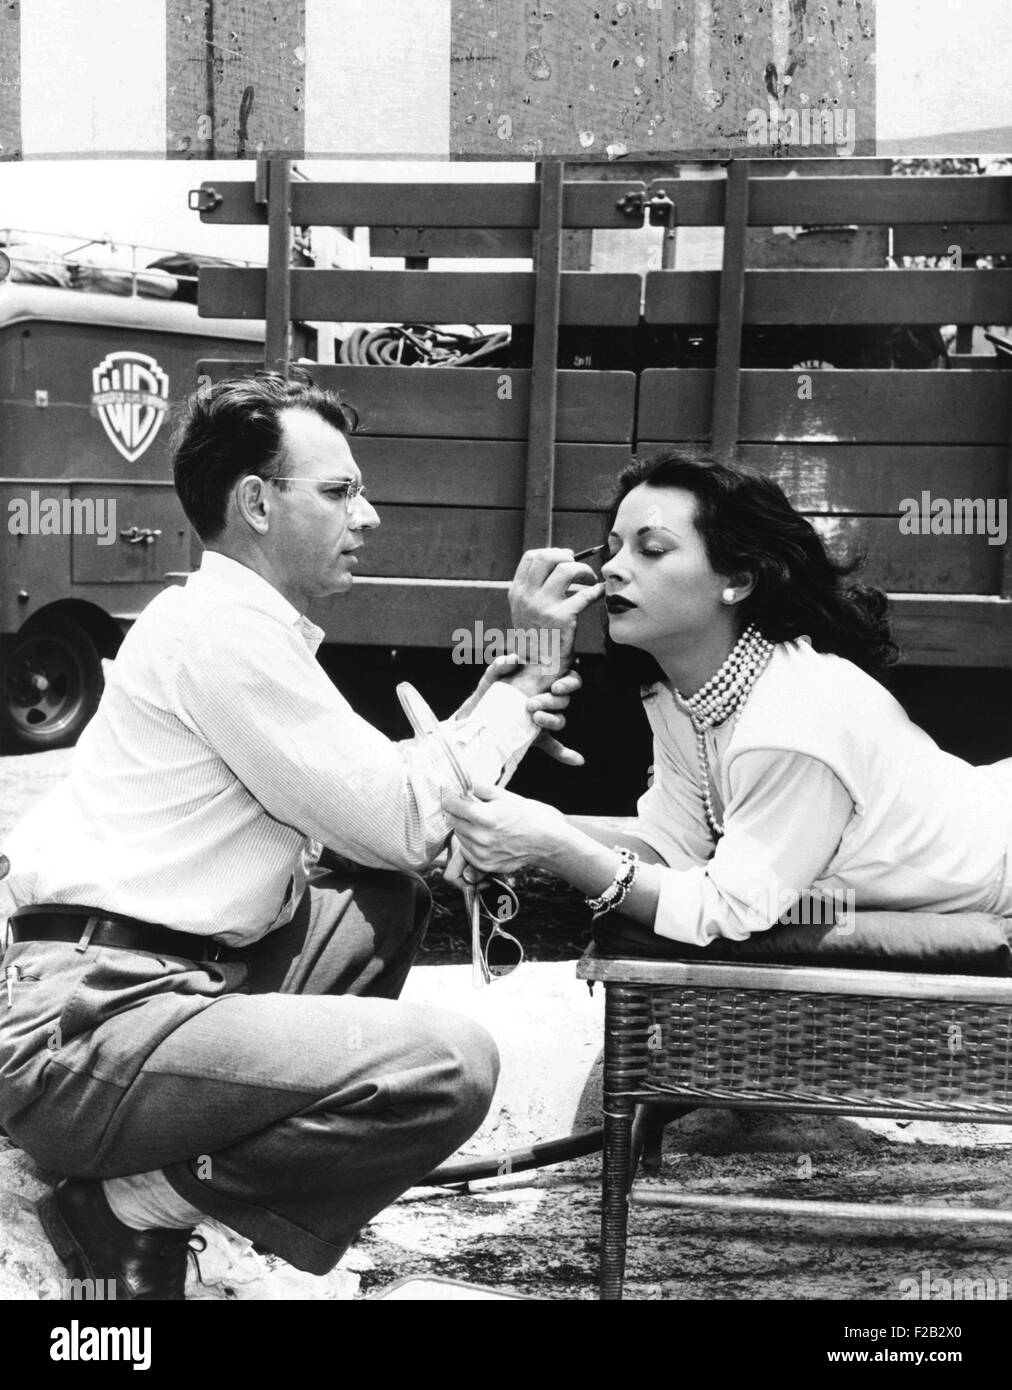 Makeup artist Ben Nye applying eye makeup to actress Hedy Lamarr who observes in a mirror. Ca. 1940s. (CSU 2015 8 485) Stock Photo